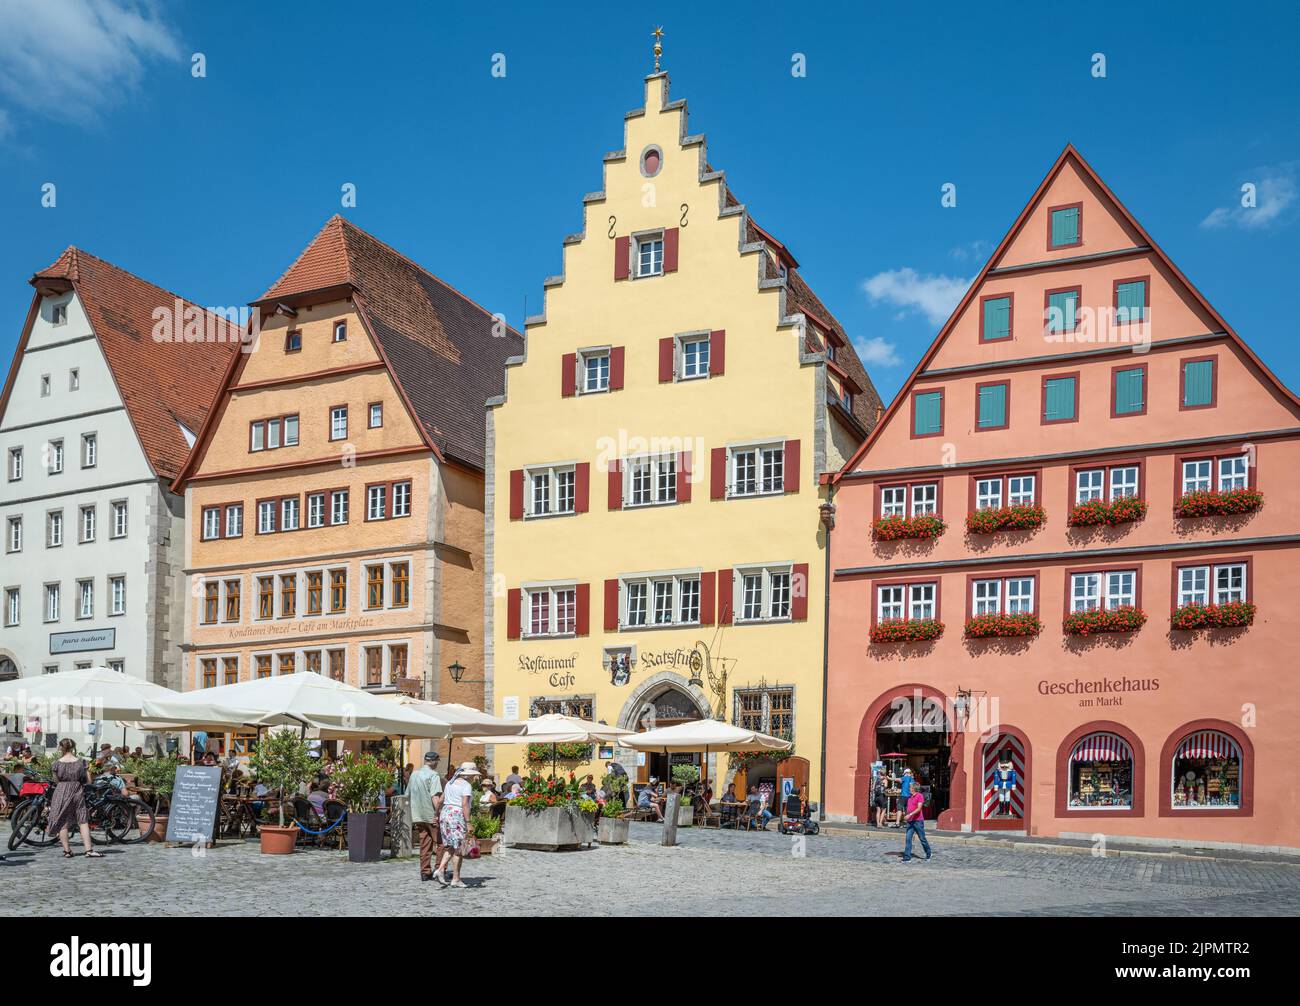 Rothenburg ob der Tauber, Germany - July 20, 2021: The medieval houses of Market square Stock Photo